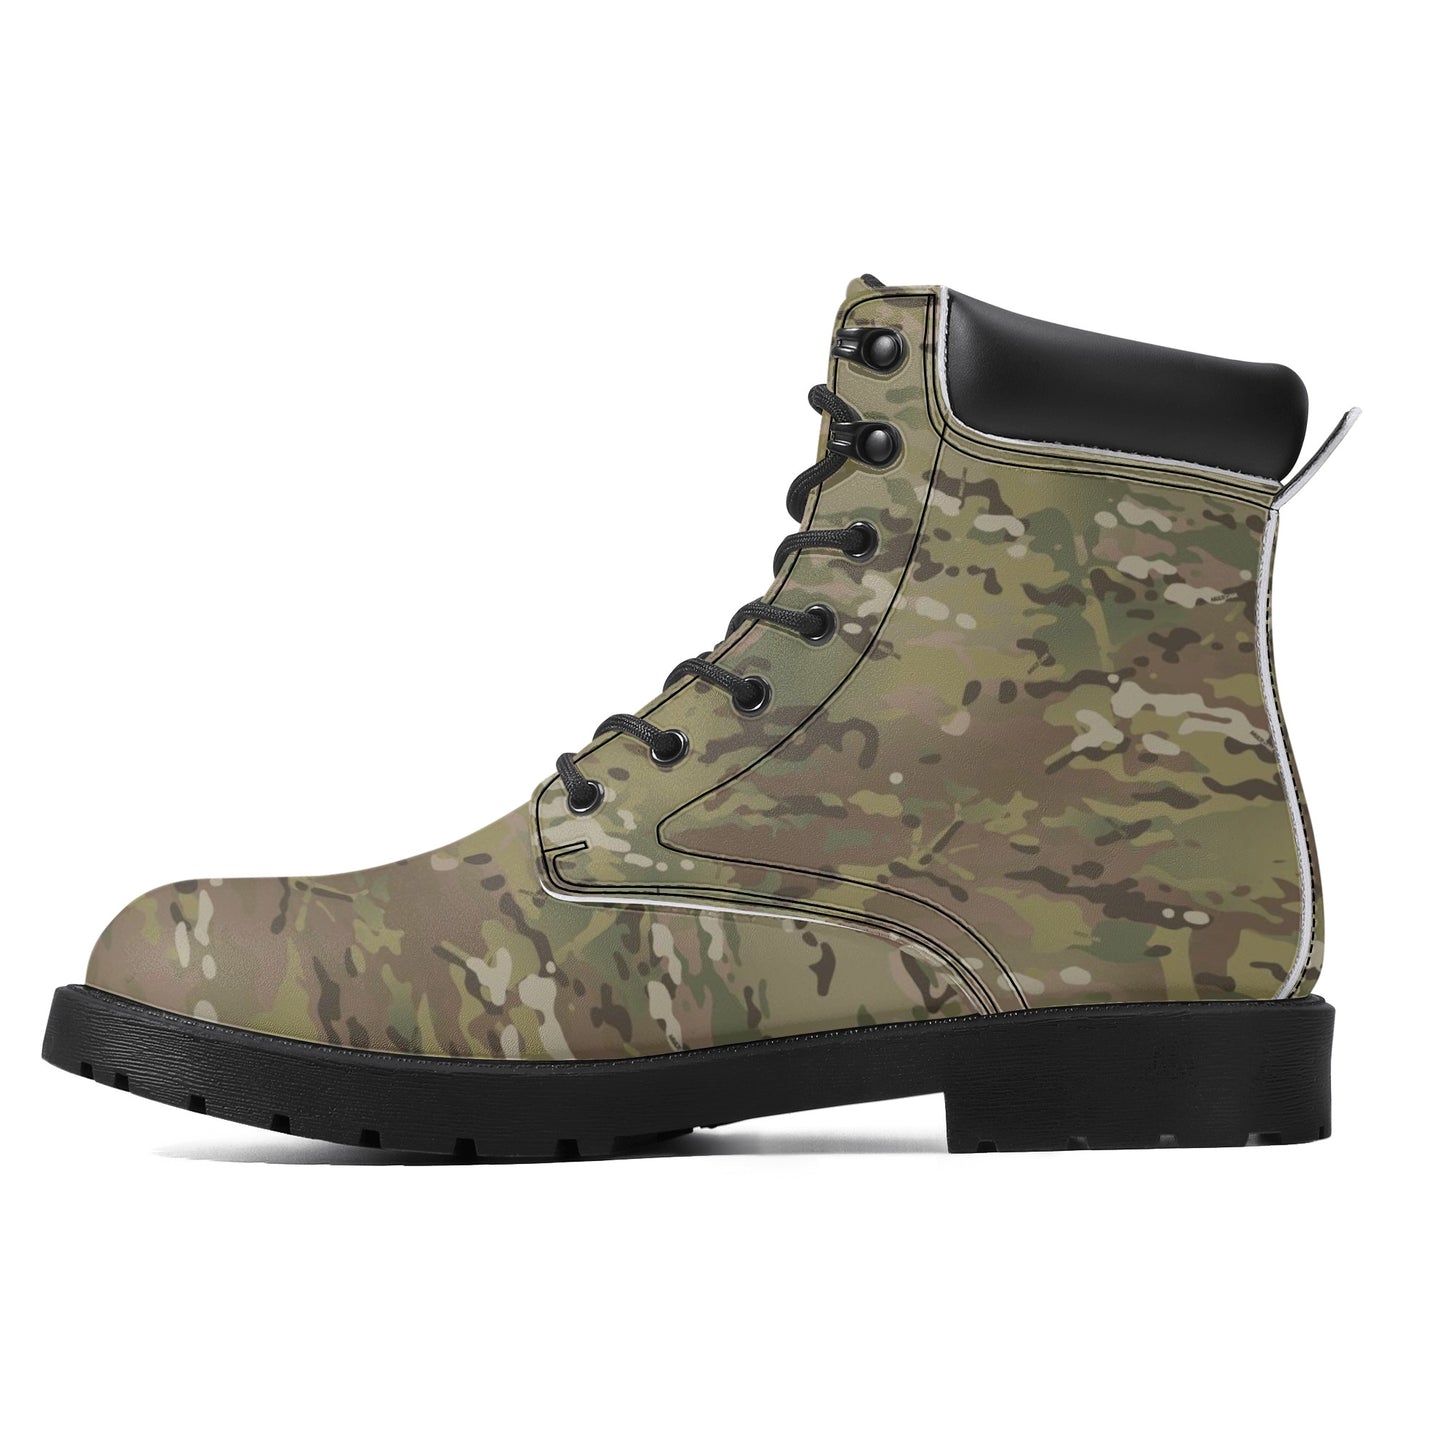 Multicam Mens All Season Leather Boots